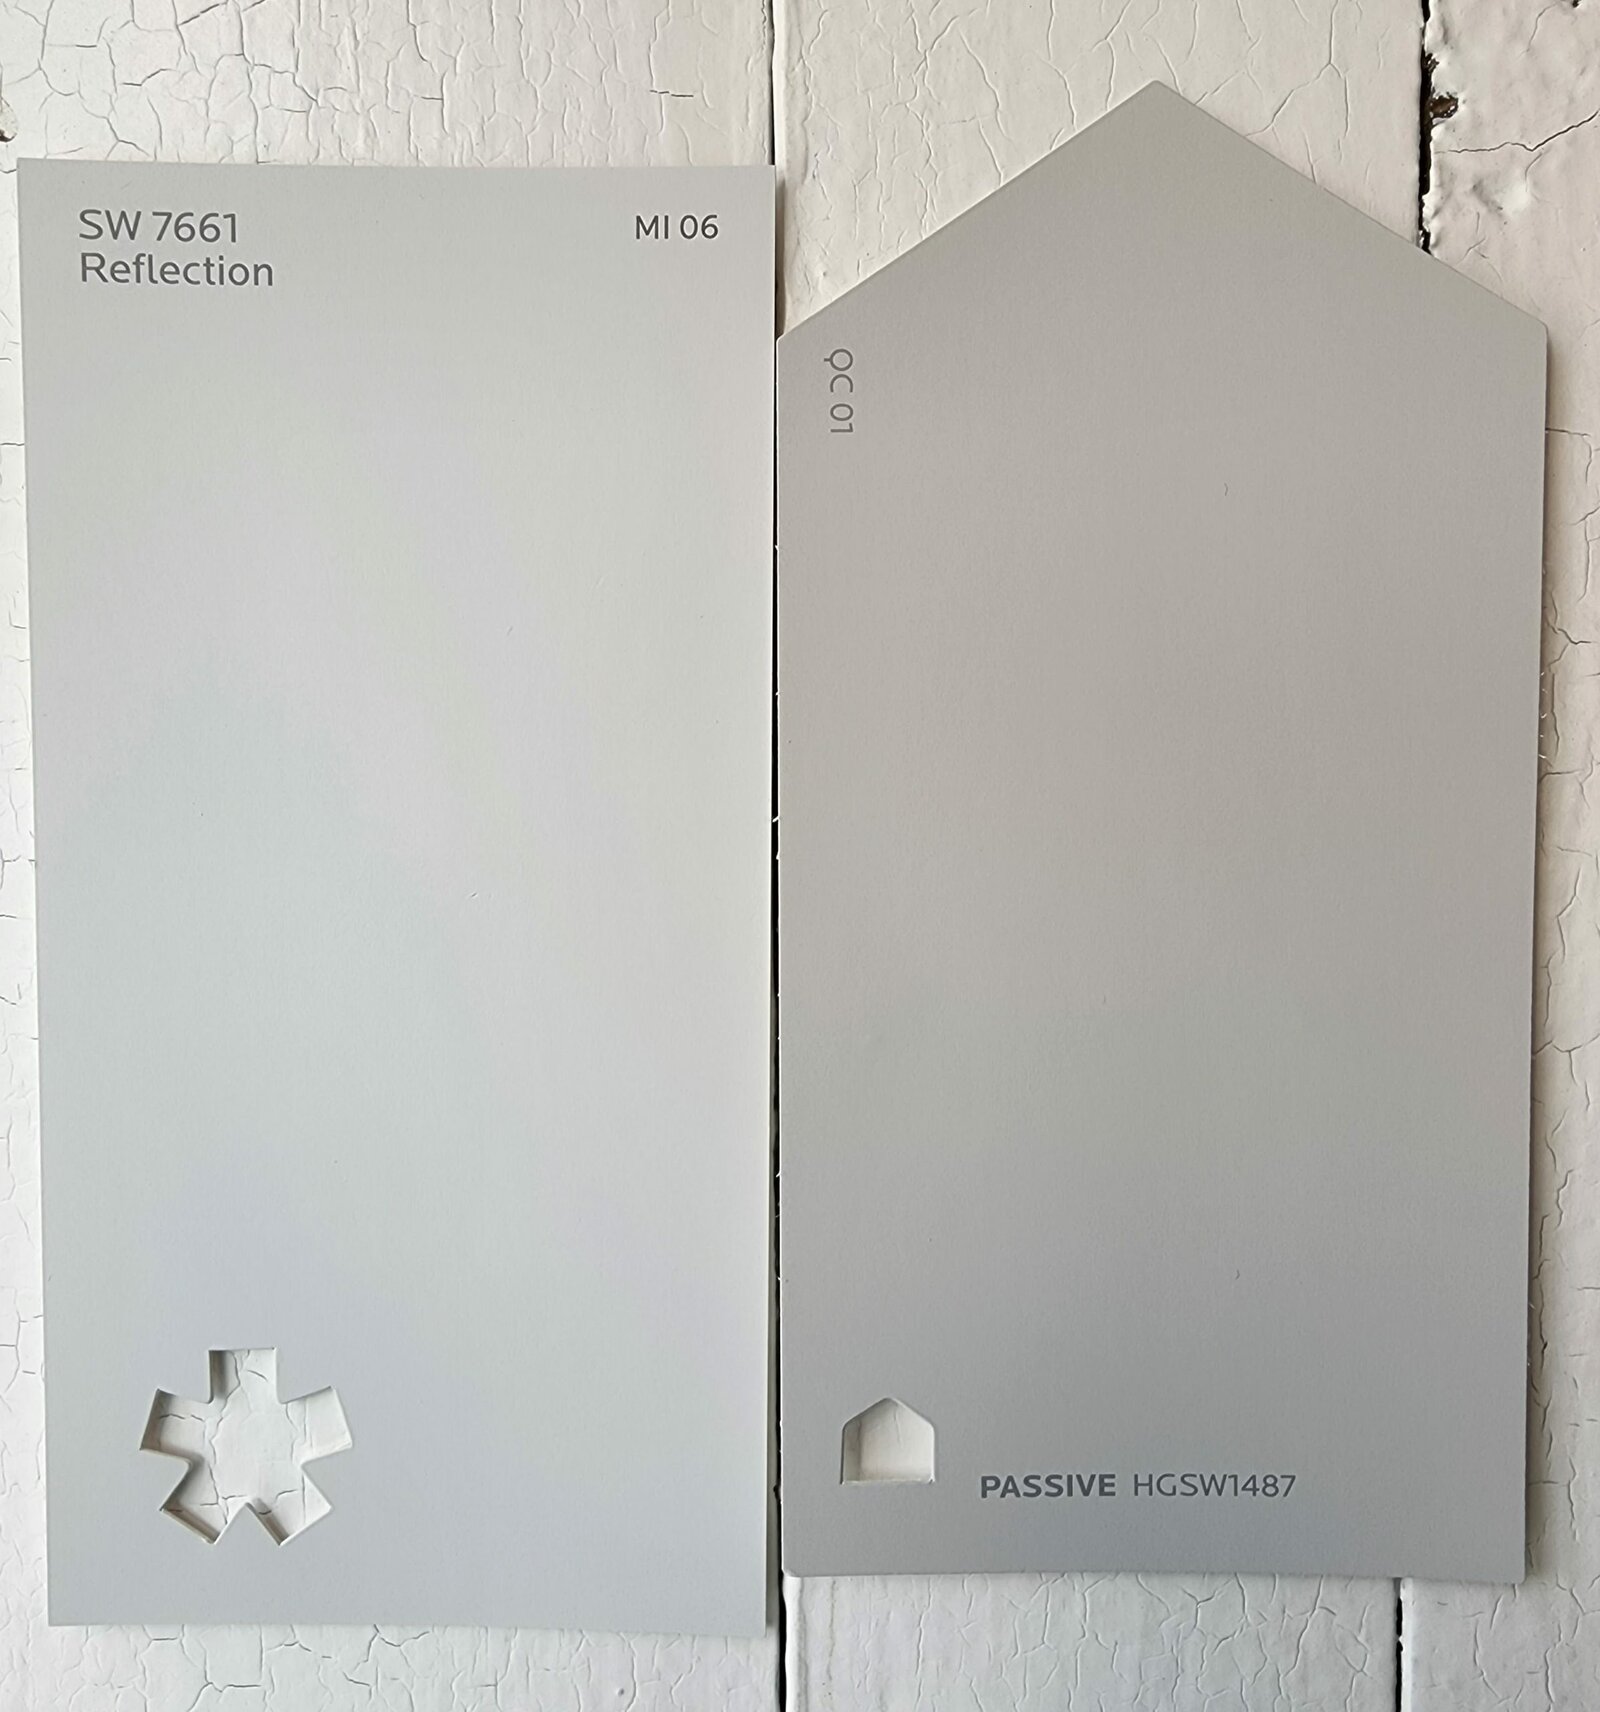  Reflection vs Passive by Sherwin Williams scaled